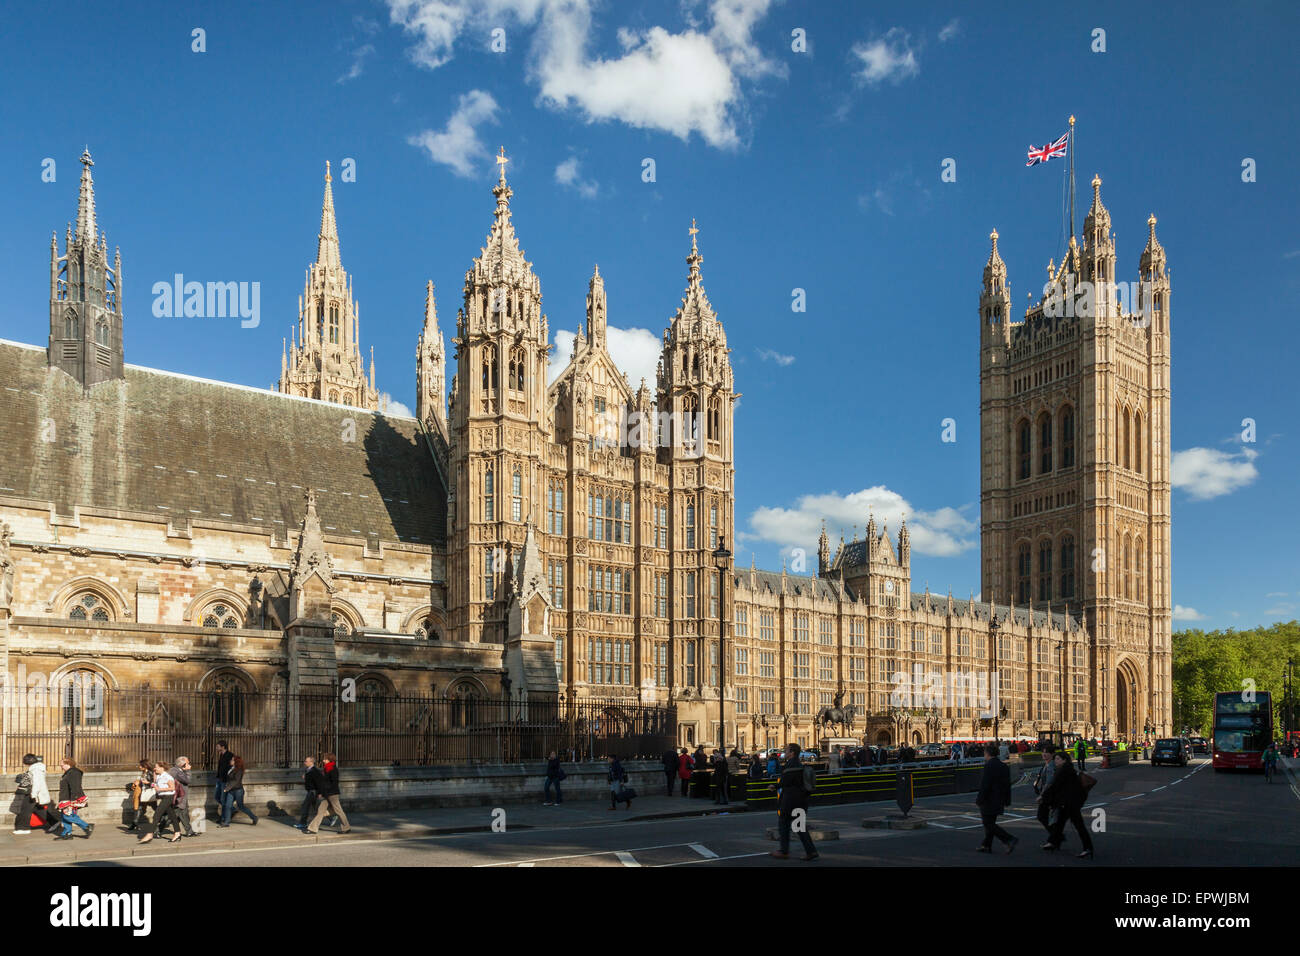 Nachmittag in Westminster, London, England. Stockfoto